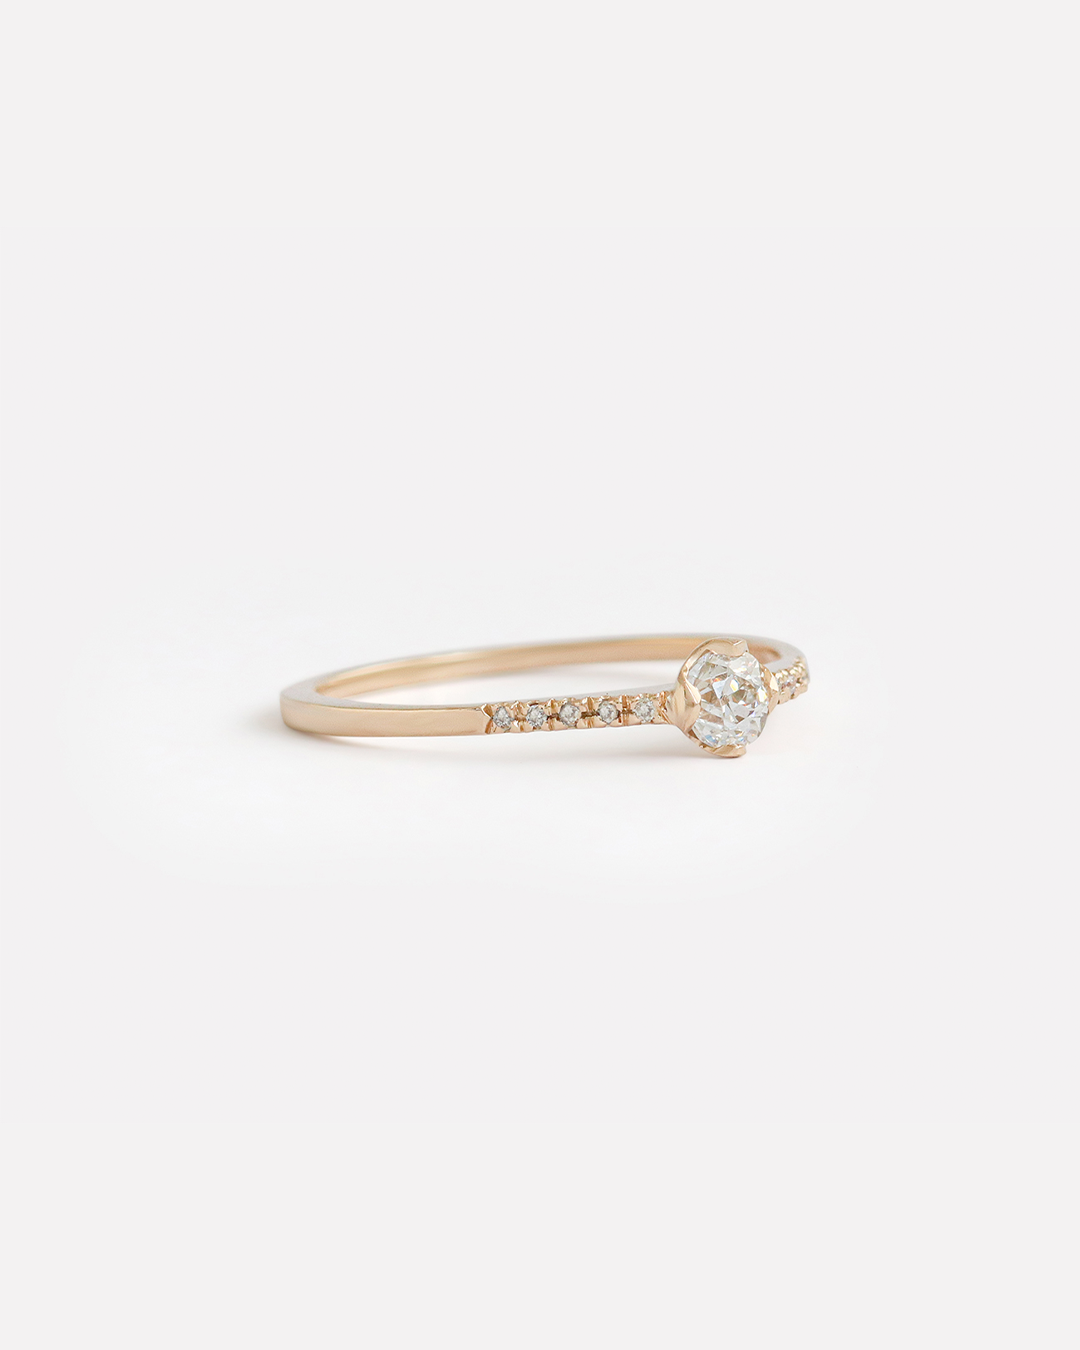 Pave / 3mm Old European Cut Diamond By fitzgerald jewelry